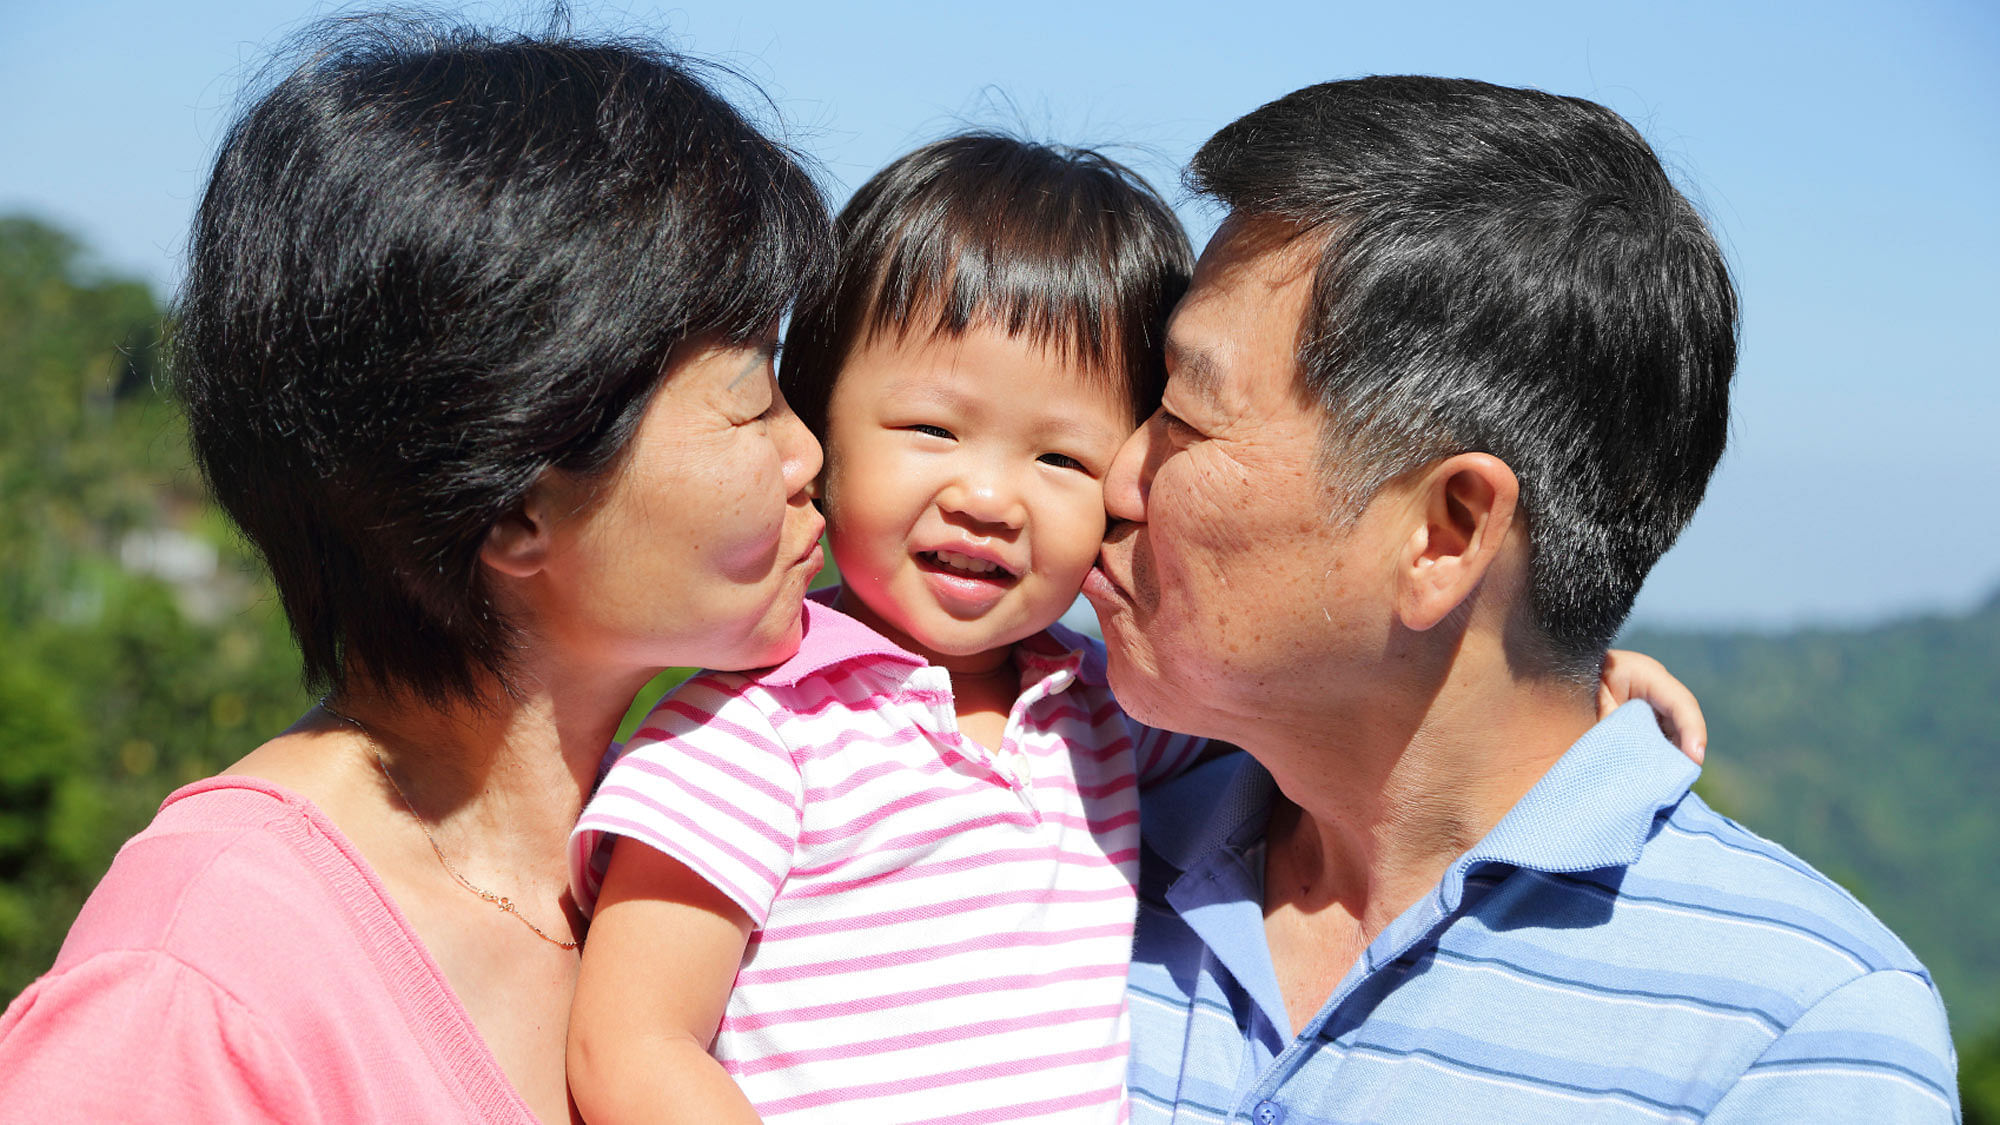 China will support couples that wish to have a third child, according to a meeting of the Political Bureau of Communist Party of China Central Committee held on Monday.